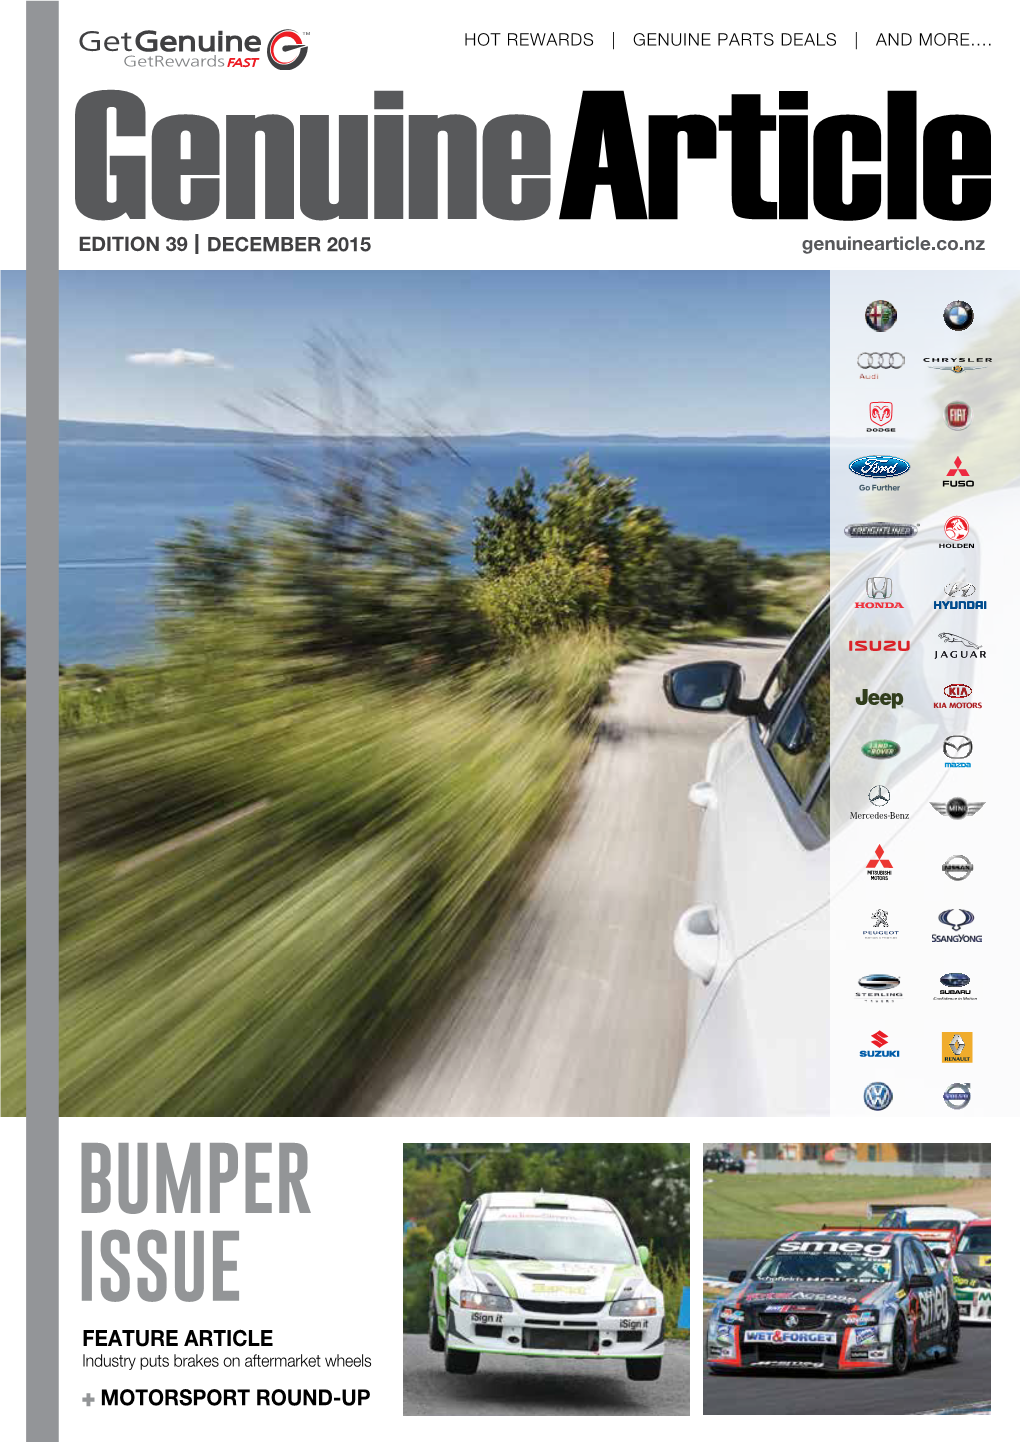 BUMPER ISSUE FEATURE ARTICLE Industry Puts Brakes on Aftermarket Wheels + MOTORSPORT ROUND-UP Great News Turn Your STATIONERY Spend Into FANTASTIC Rewards!